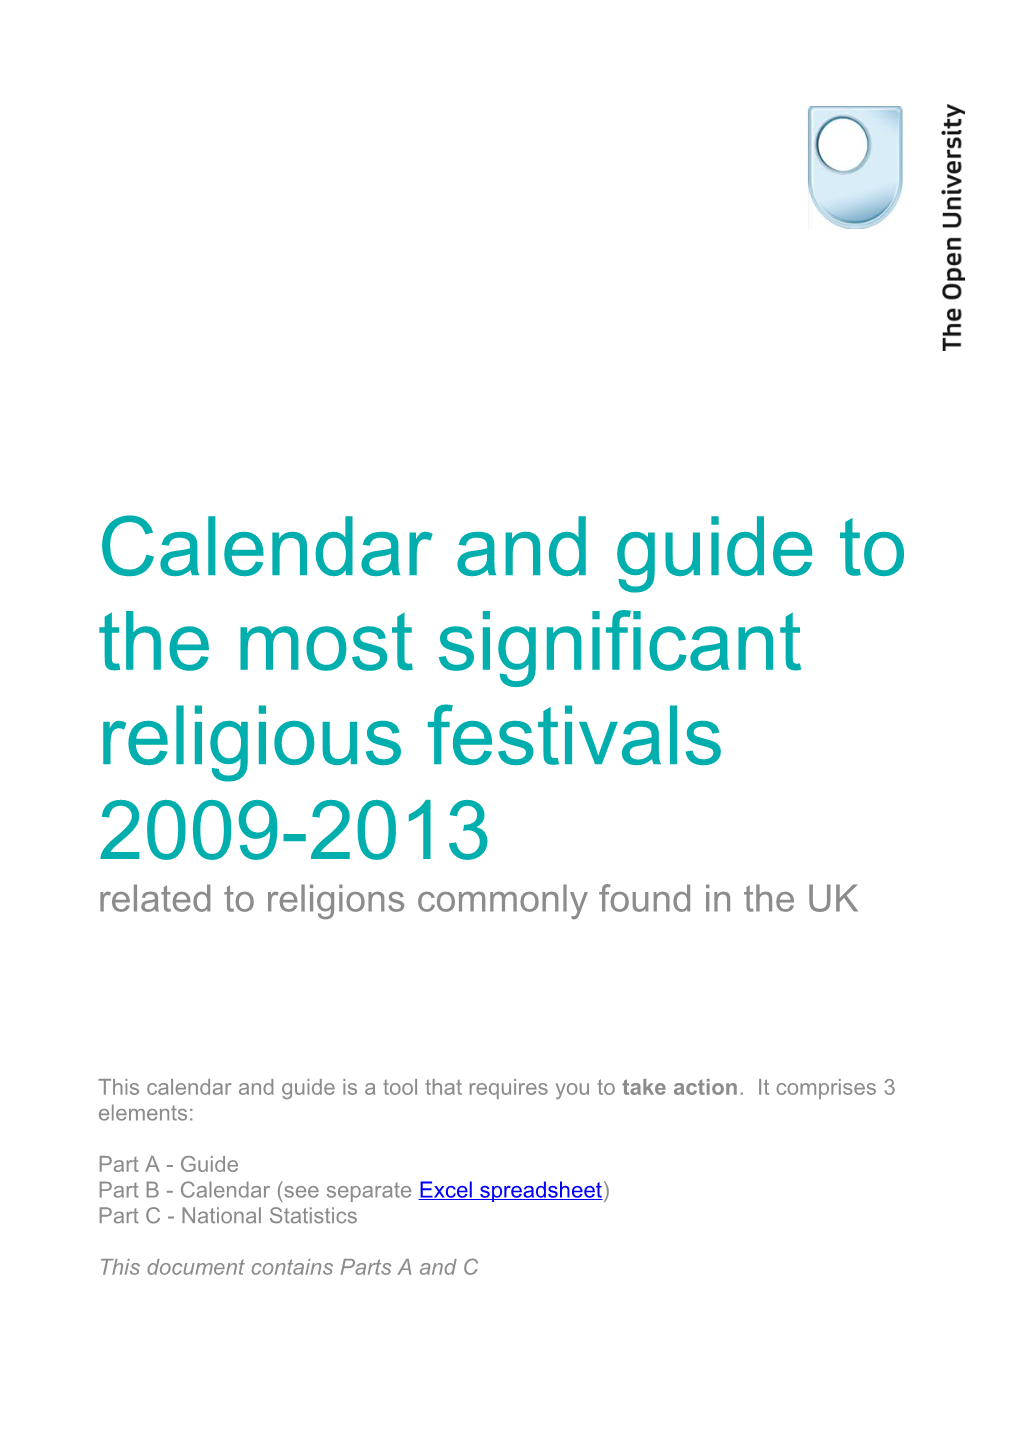 Calendar and Guide to the Most Significant Religious Festivals 2009-2013 Parts a and C